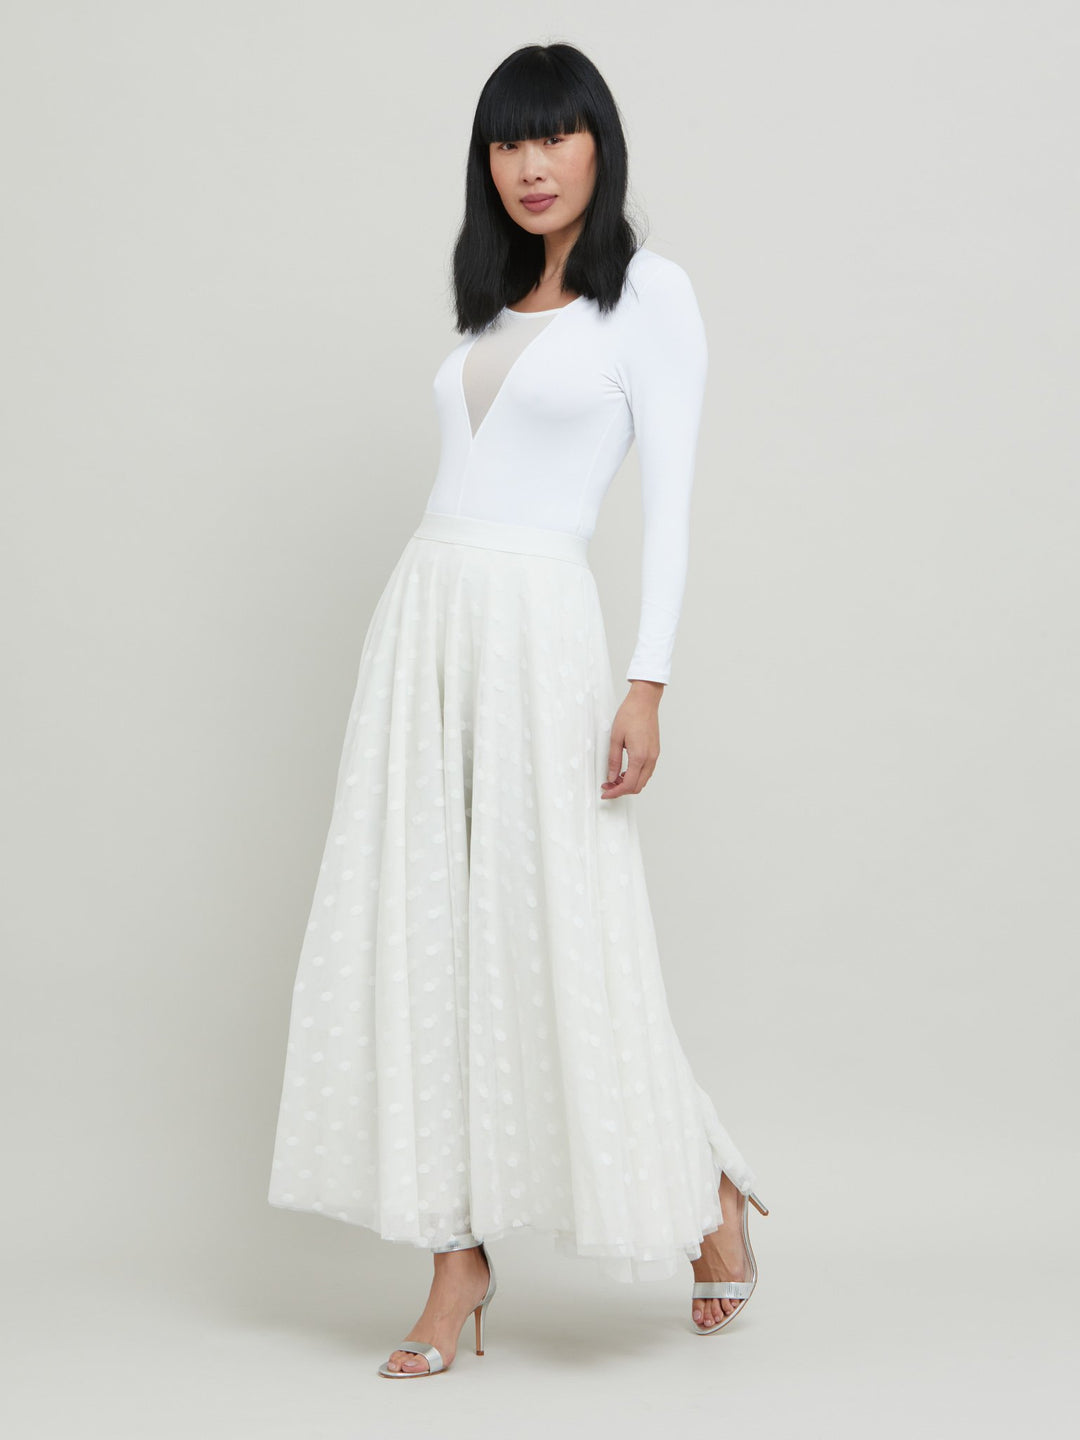 Savannah, this season multi-layer, circular skirt in a luxe polka dot tulle. Features an elasticated waistband and falls to the ankle. For the perfect occasion & wedding look pair with the iconic white Darcie jacket & the Brooklyn body. Designed in Ireland by Helen McAlinden. Made in Europe. Free shipping to the EU & UK.